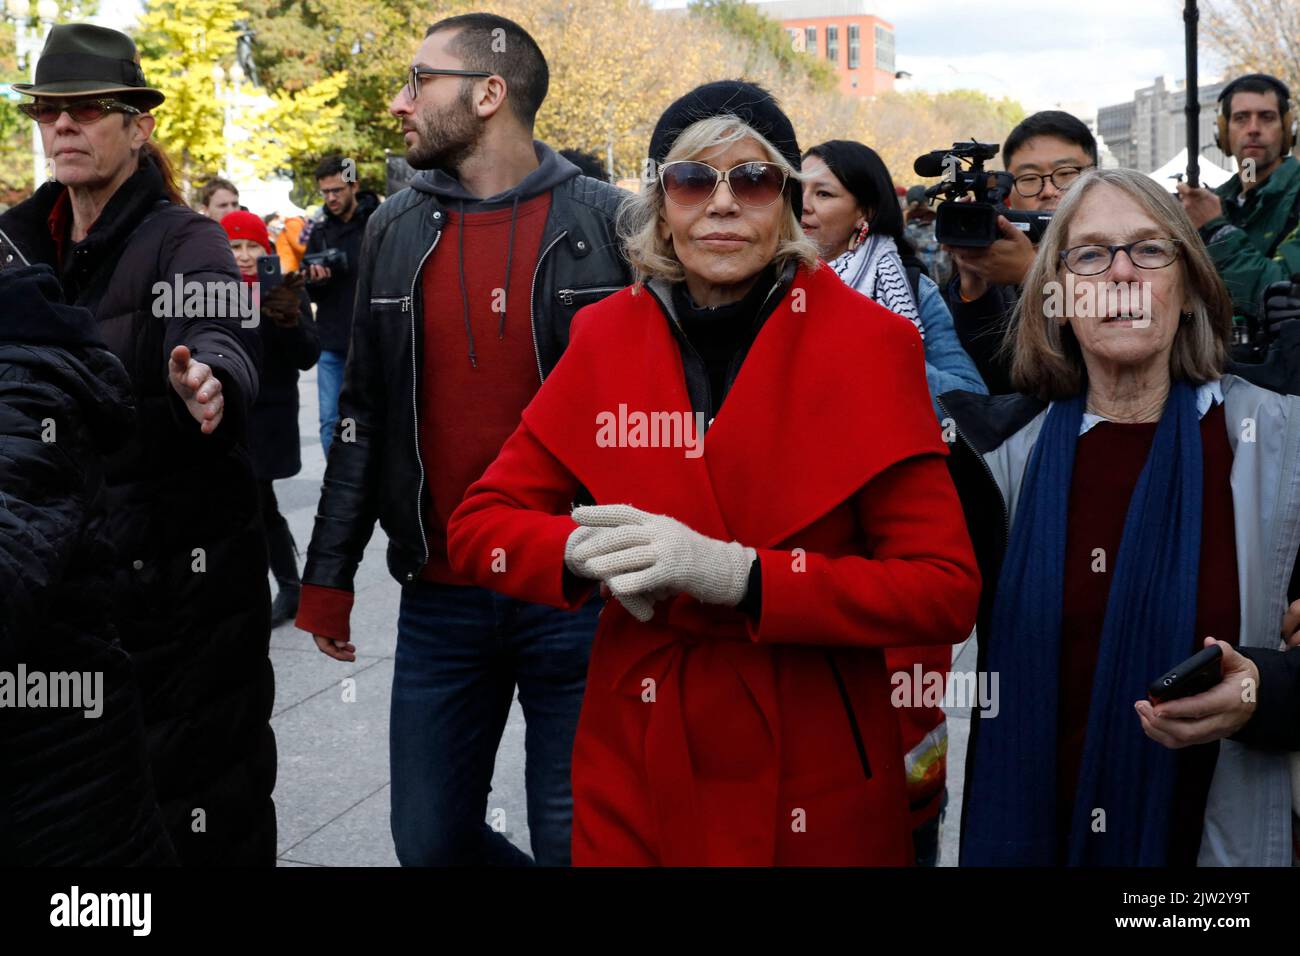 Actress Jane Fonda participates in a rally against climate change outside the White House in Washington on November 8, 2019. Fonda, known for her opposition to the Vietnam War, participated in the Fire Drill Friday's climate change, every Friday to shine light on the changing climate and to encourage political action on the issue. Photo by Yuri Gripas/ABACAPRESS.COM Stock Photo